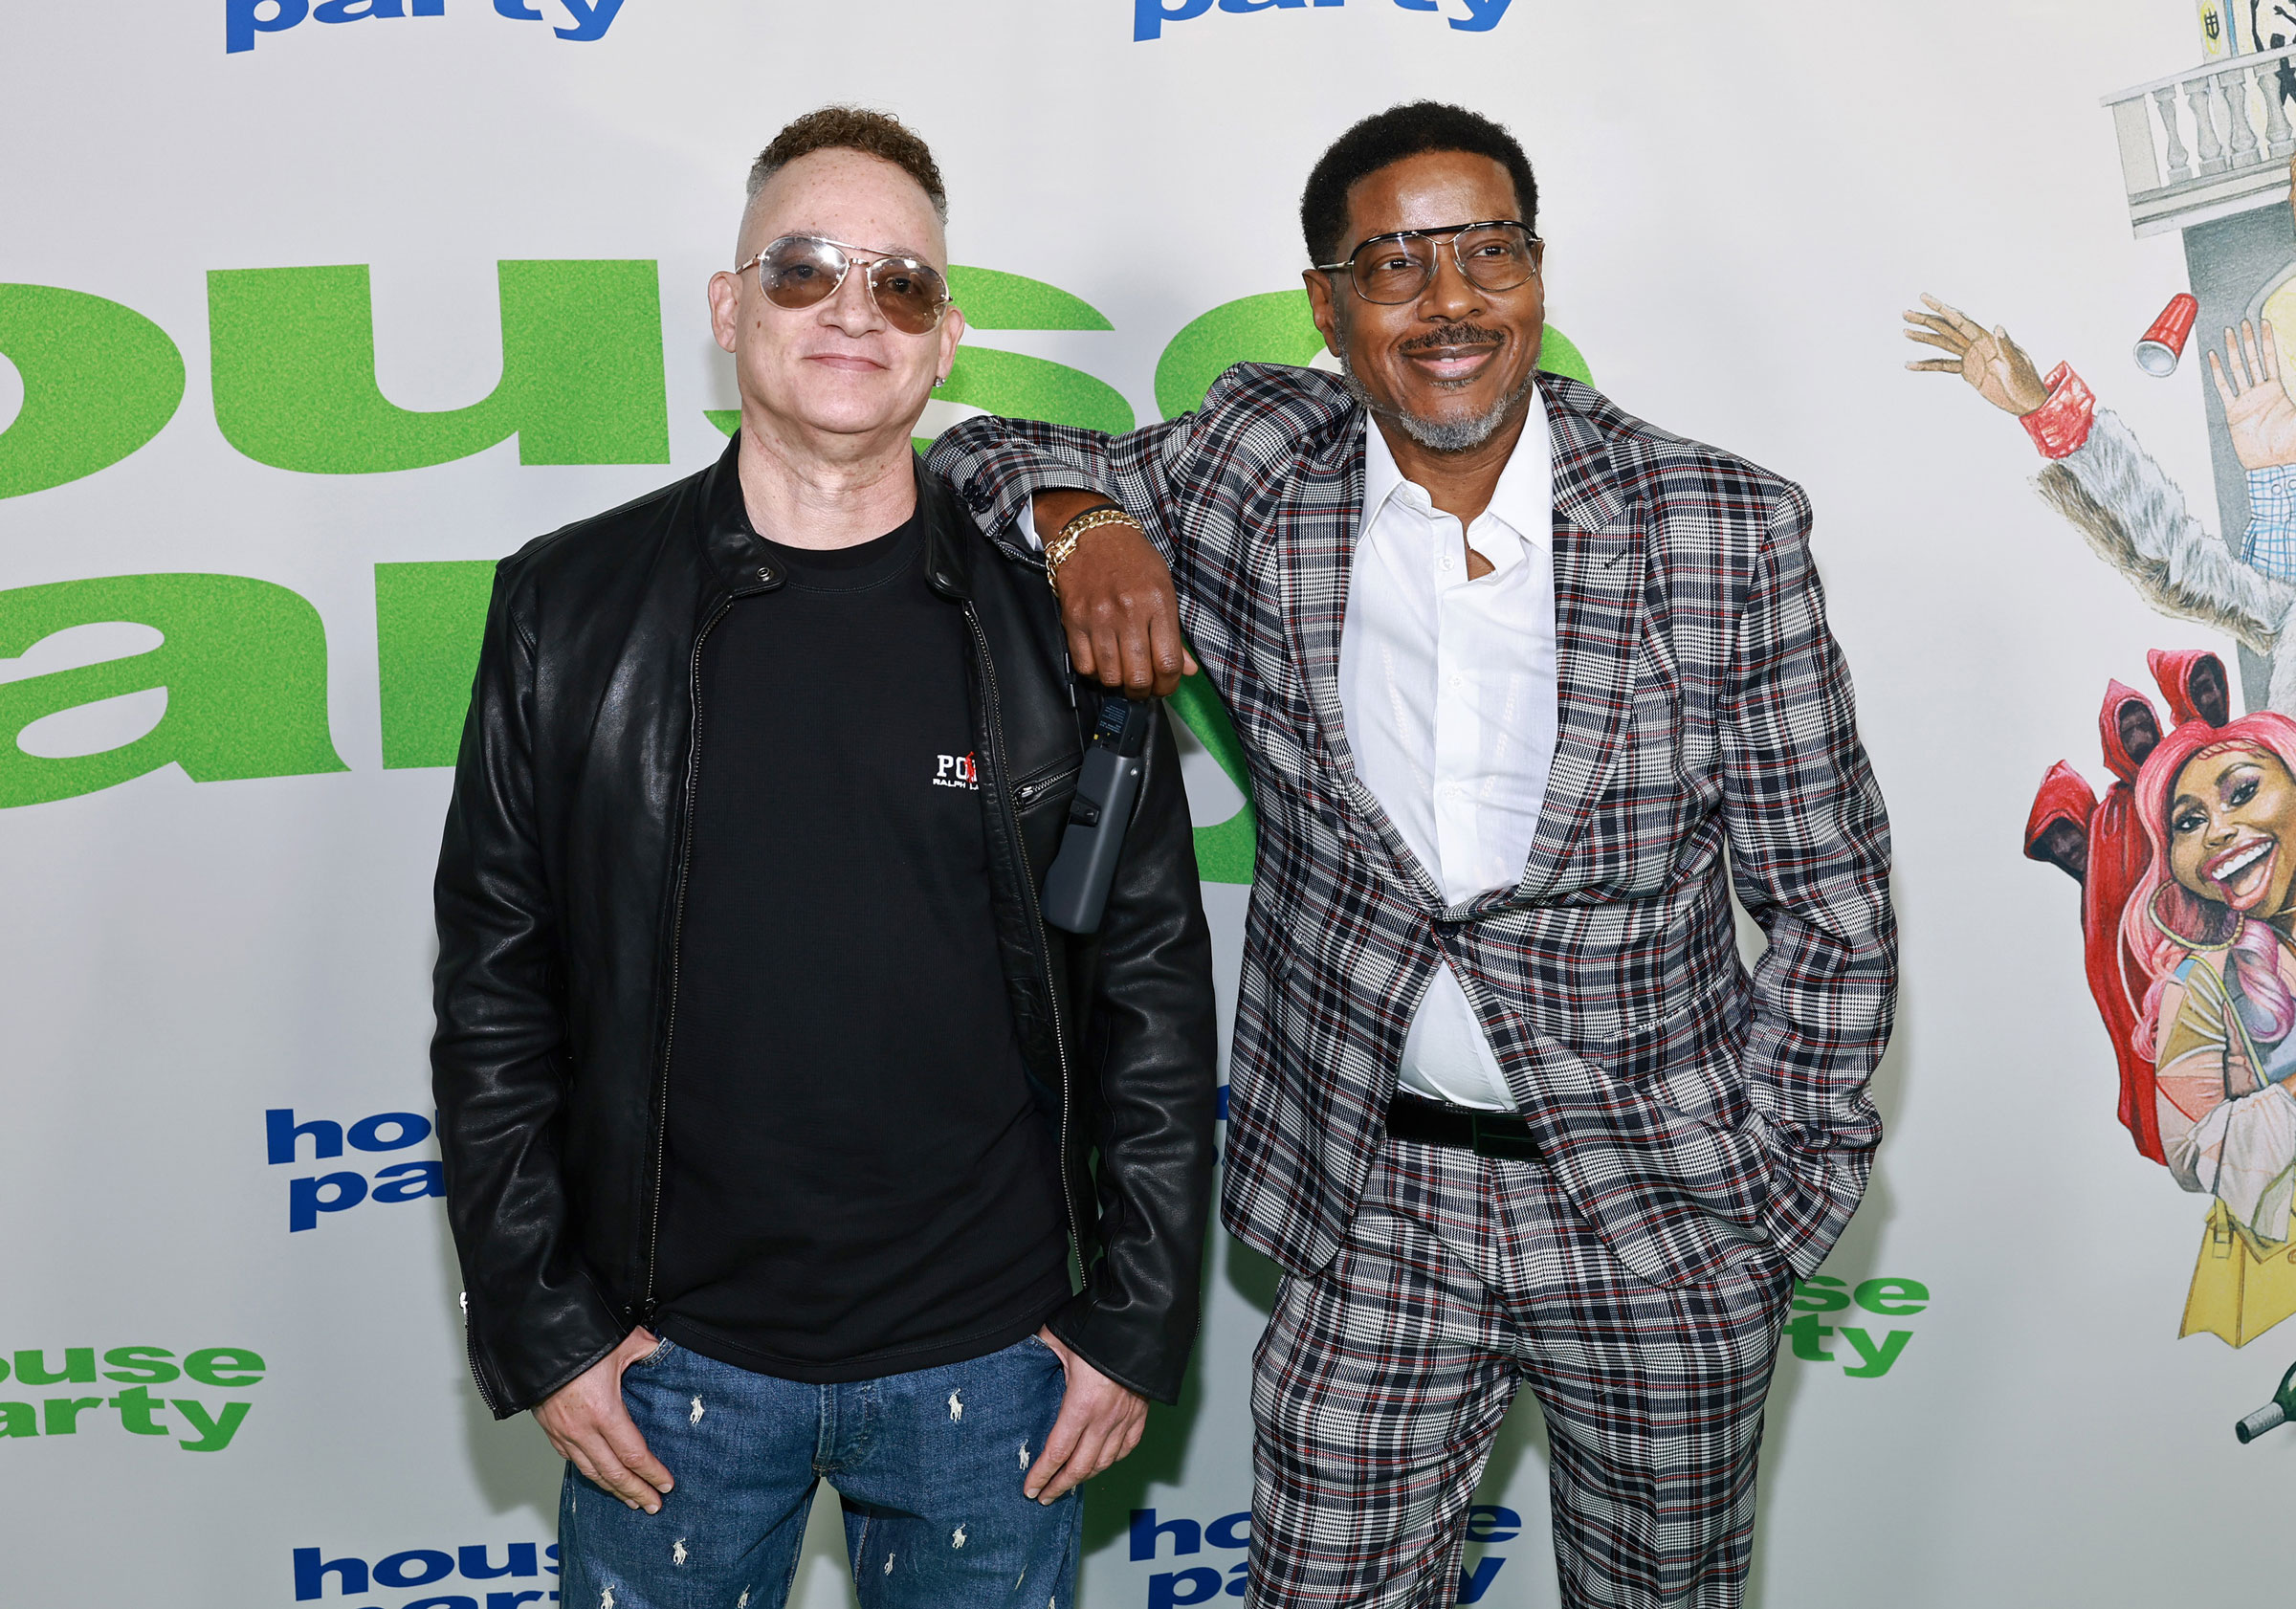 Christopher Reid Christopher Martin of Kid ’n Play attend the Special Red Carpet Screening for New Line Cinema’s “House Party” at TCL Chinese 6 Theatres in Hollywood, Calif., on Jan. 11, 2023. (Matt Winkelmeyer—Getty Images)